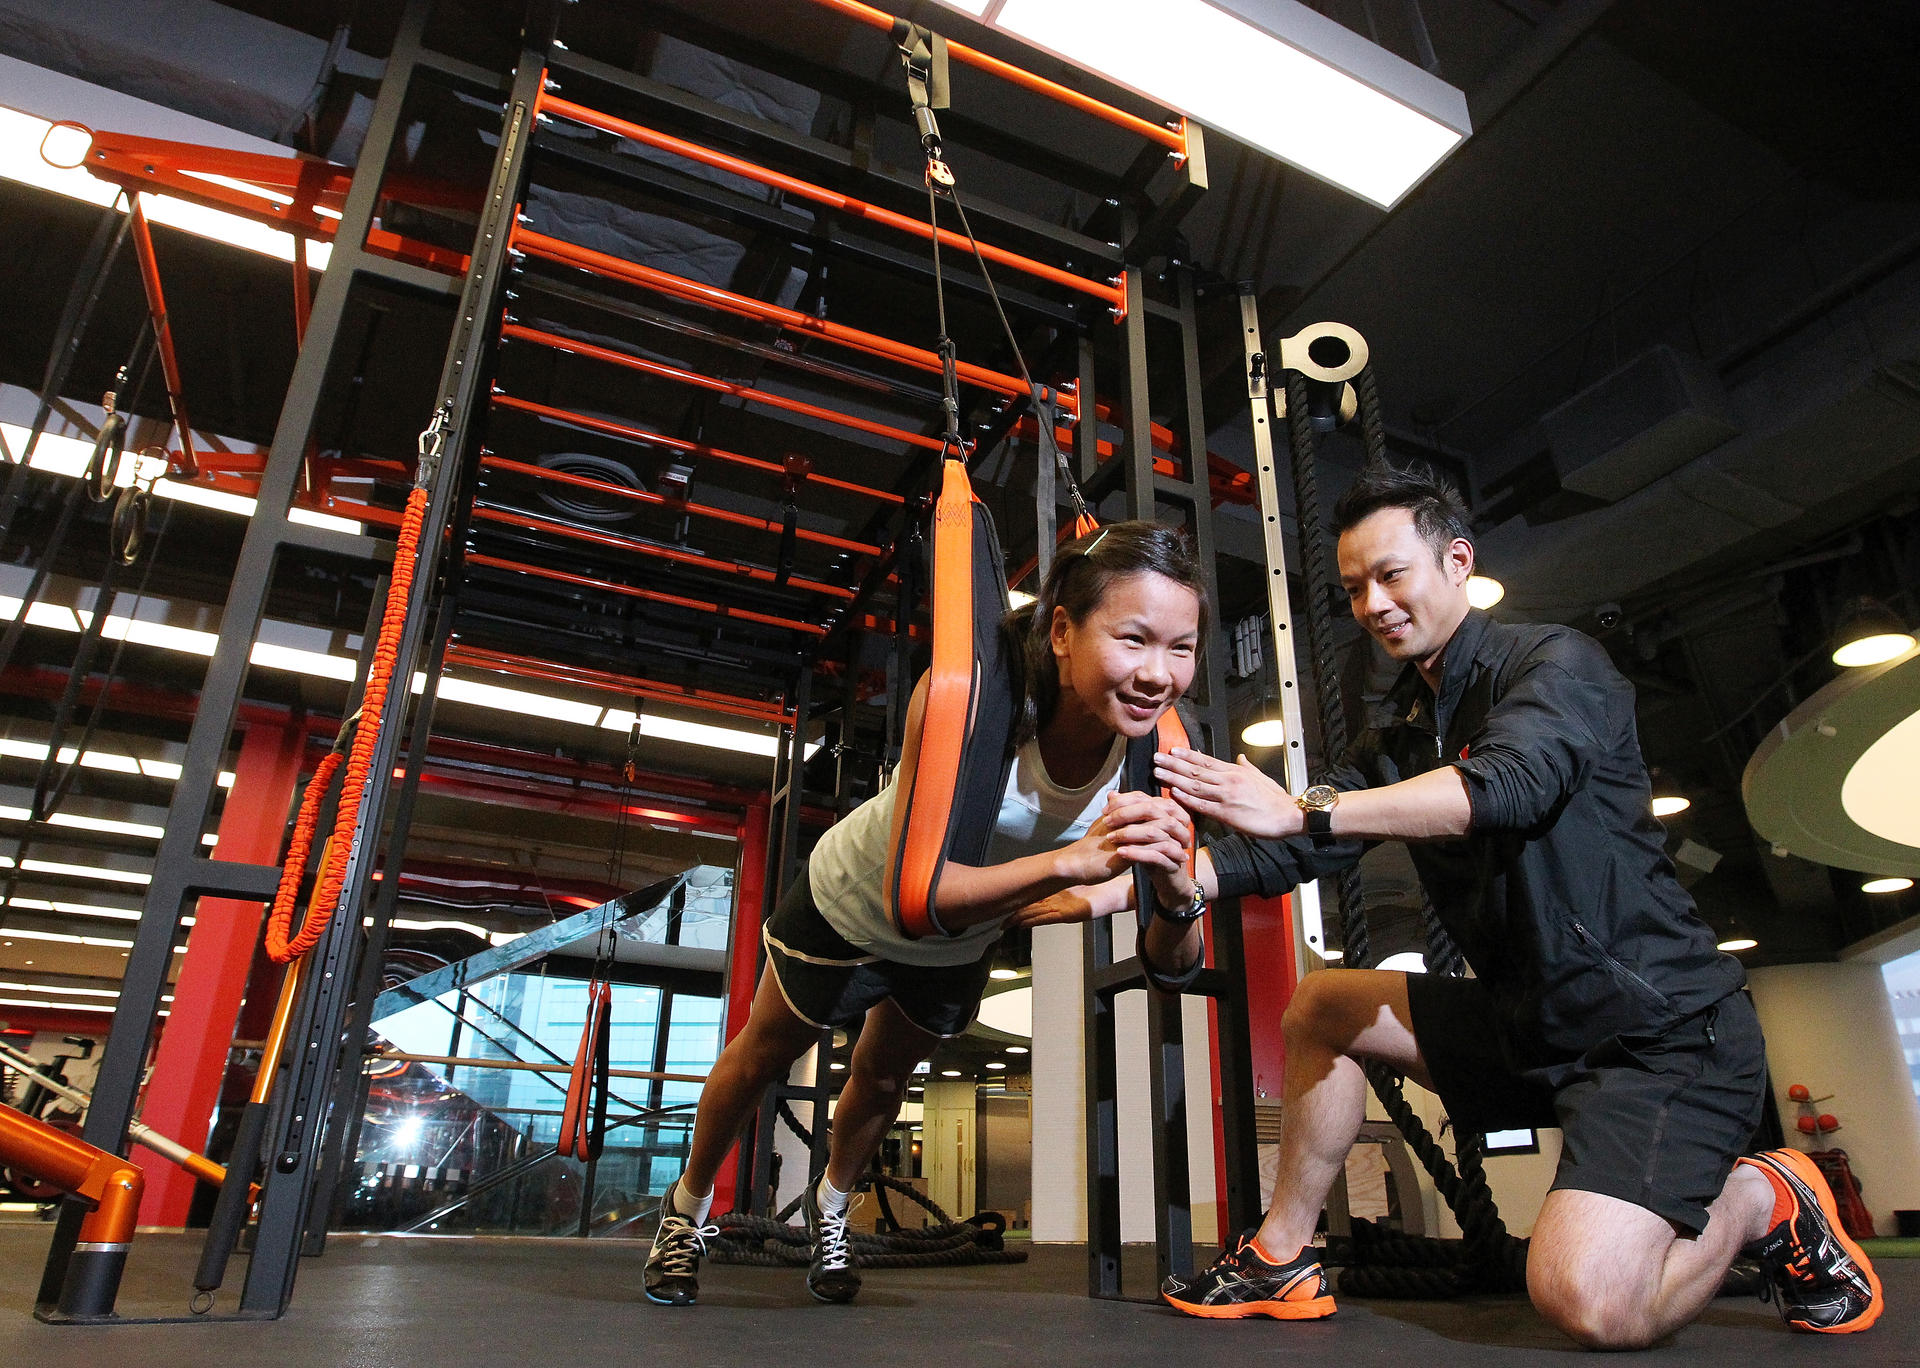 Personal trainer Alan Pak puts health editor Jeanette Wang through her paces with the PurMotion functional training equipment. The system uses ropes to train the body through a series of movements. Photos: May Tse